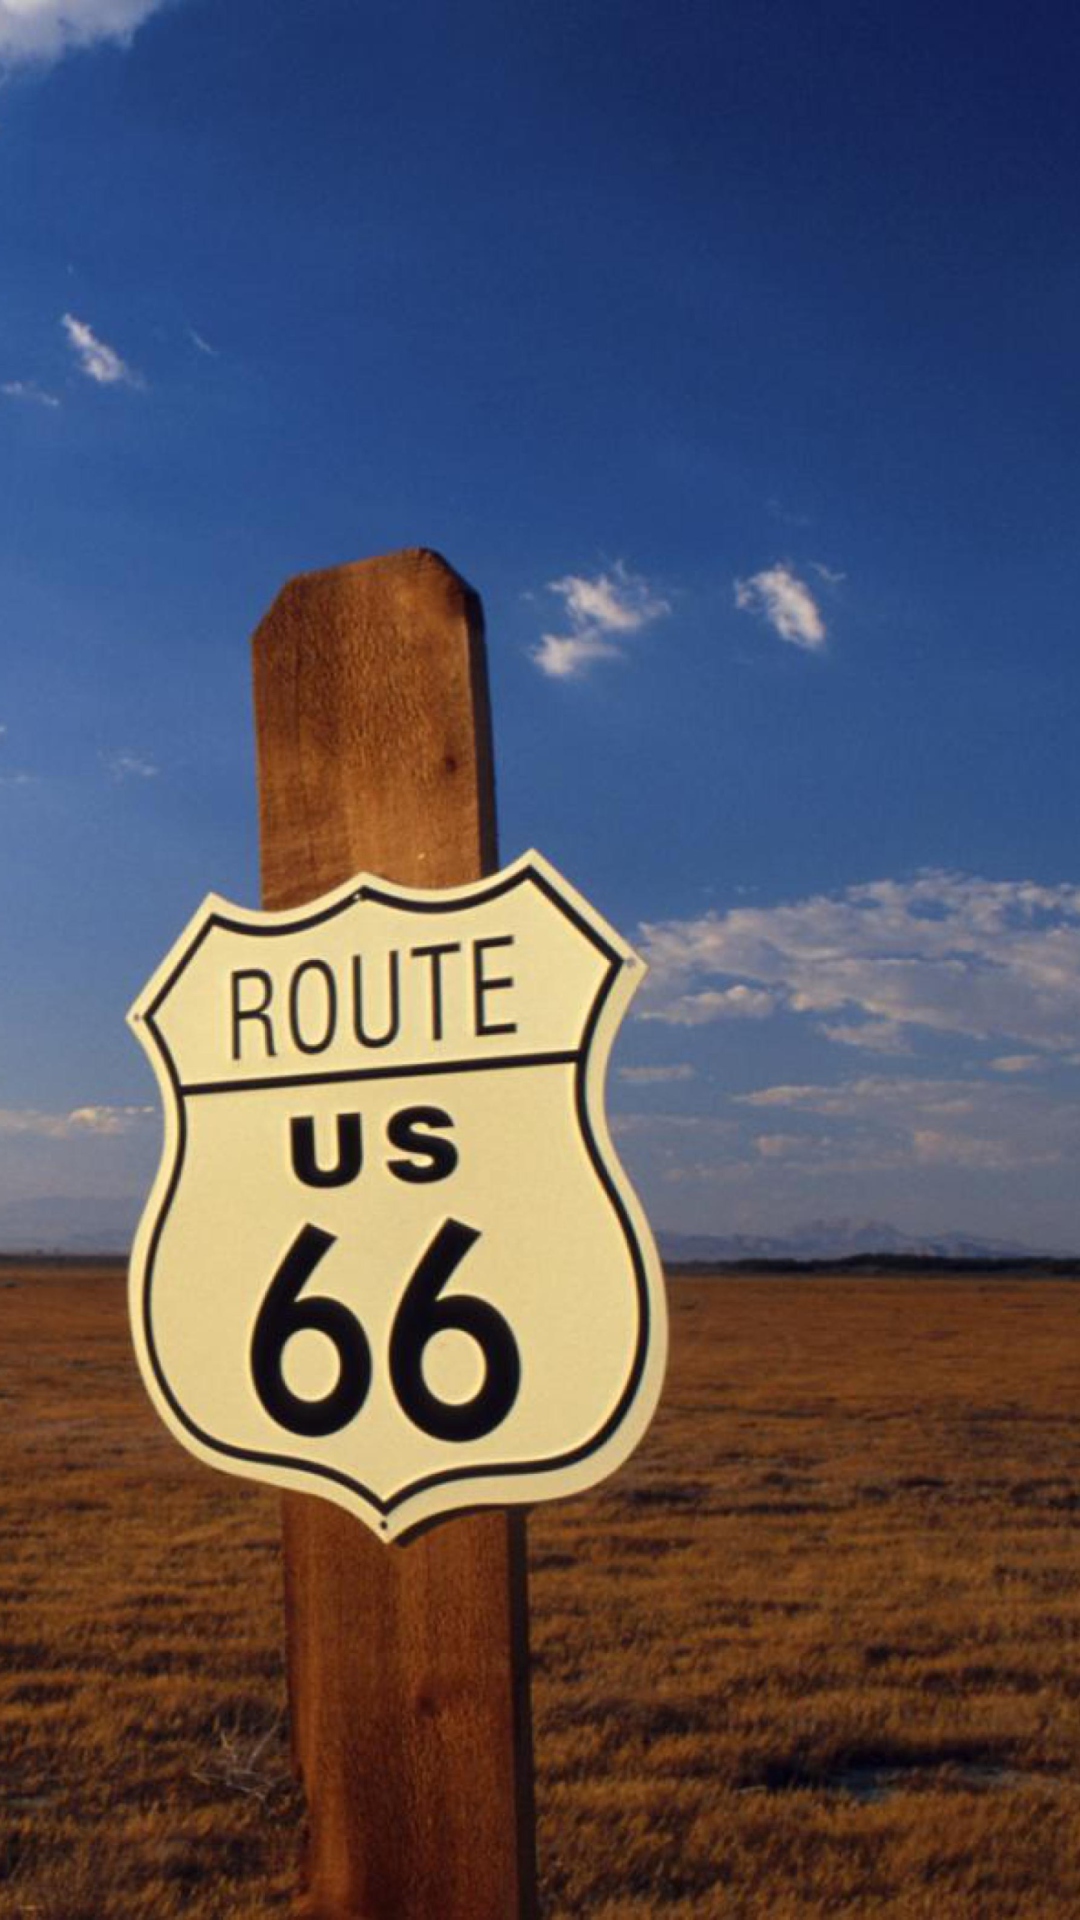 America's Most Famous Route 66 wallpaper 1080x1920